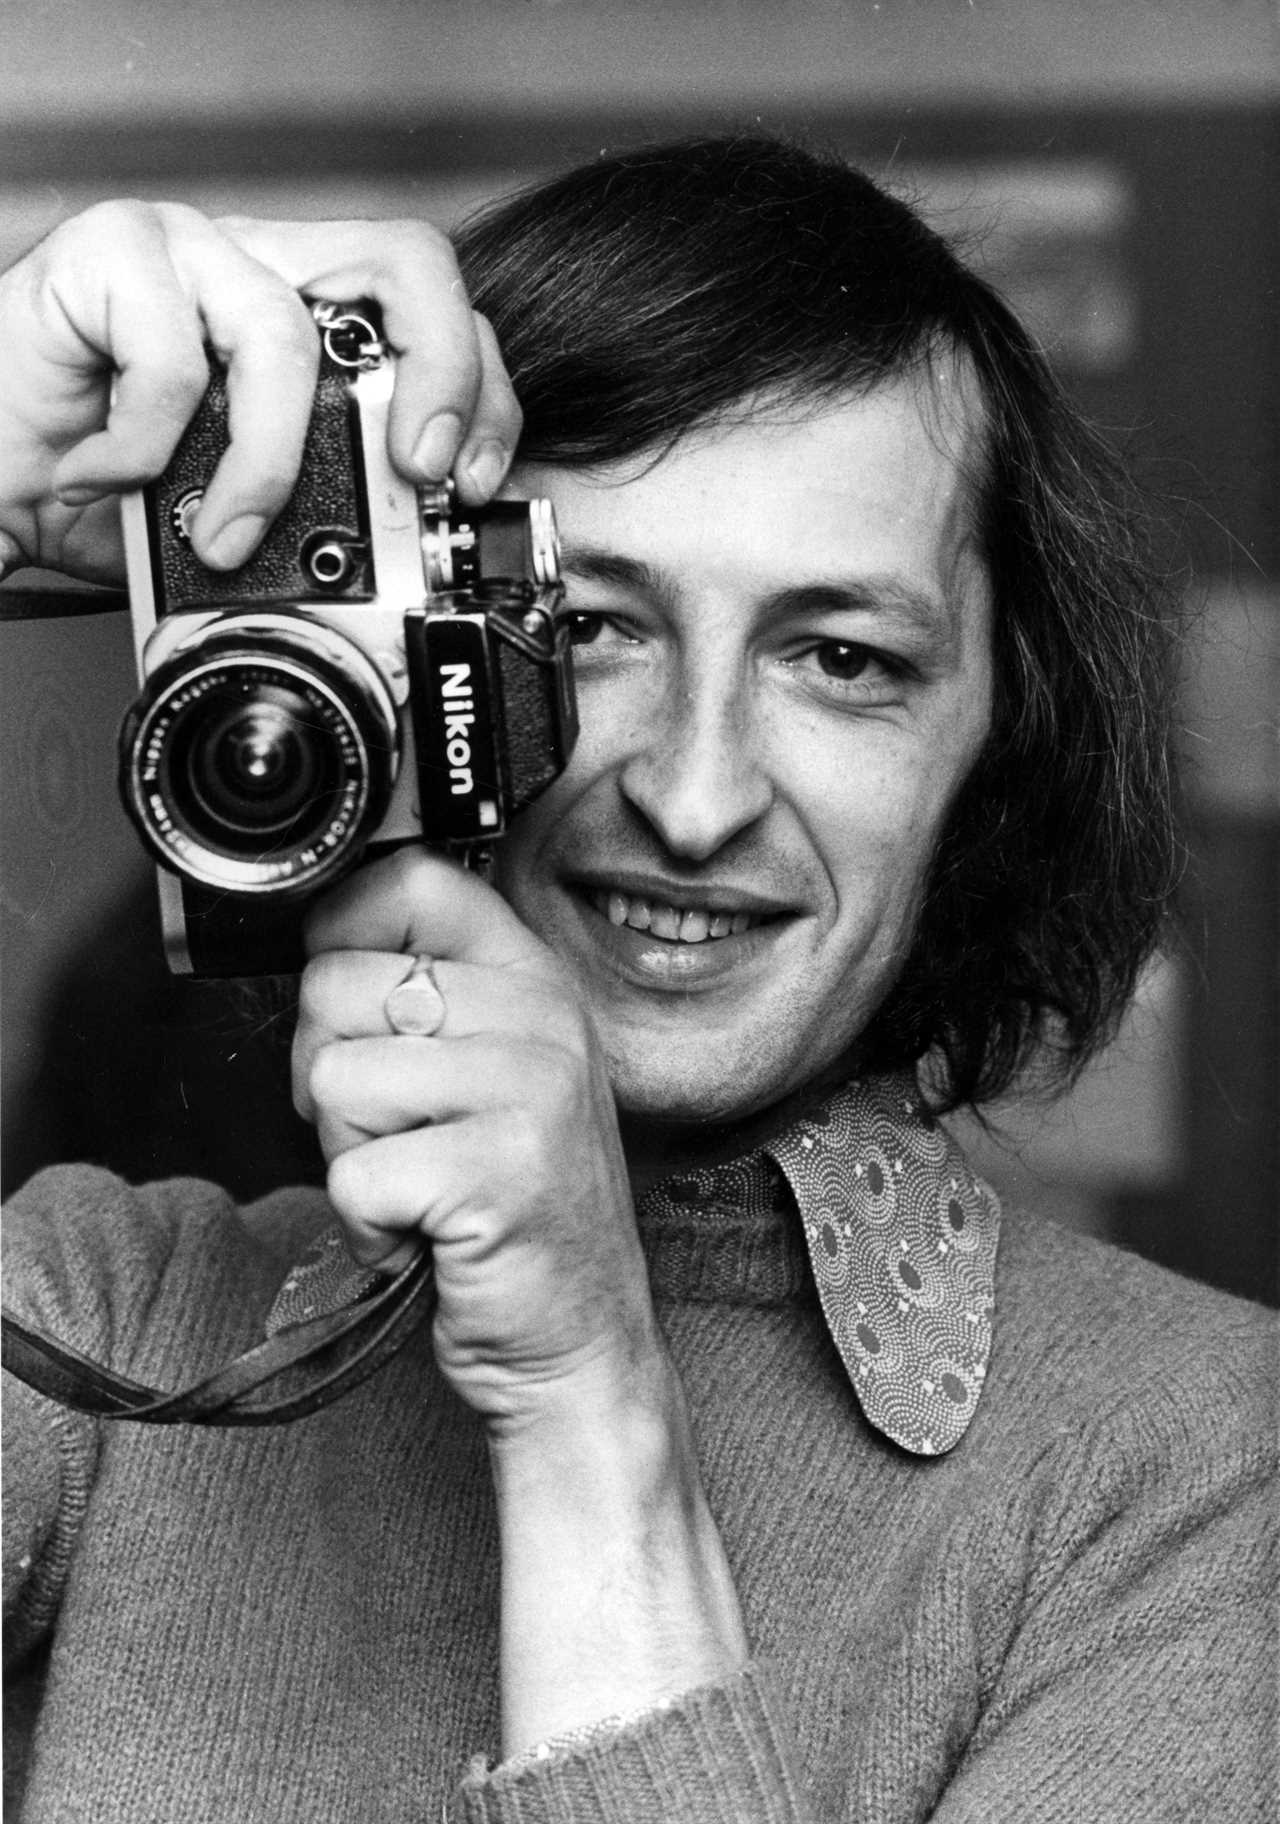 Award-winning Sun photographer Roger Bamber – who photographed the Queen and Olivia Newton-John – has died aged 77